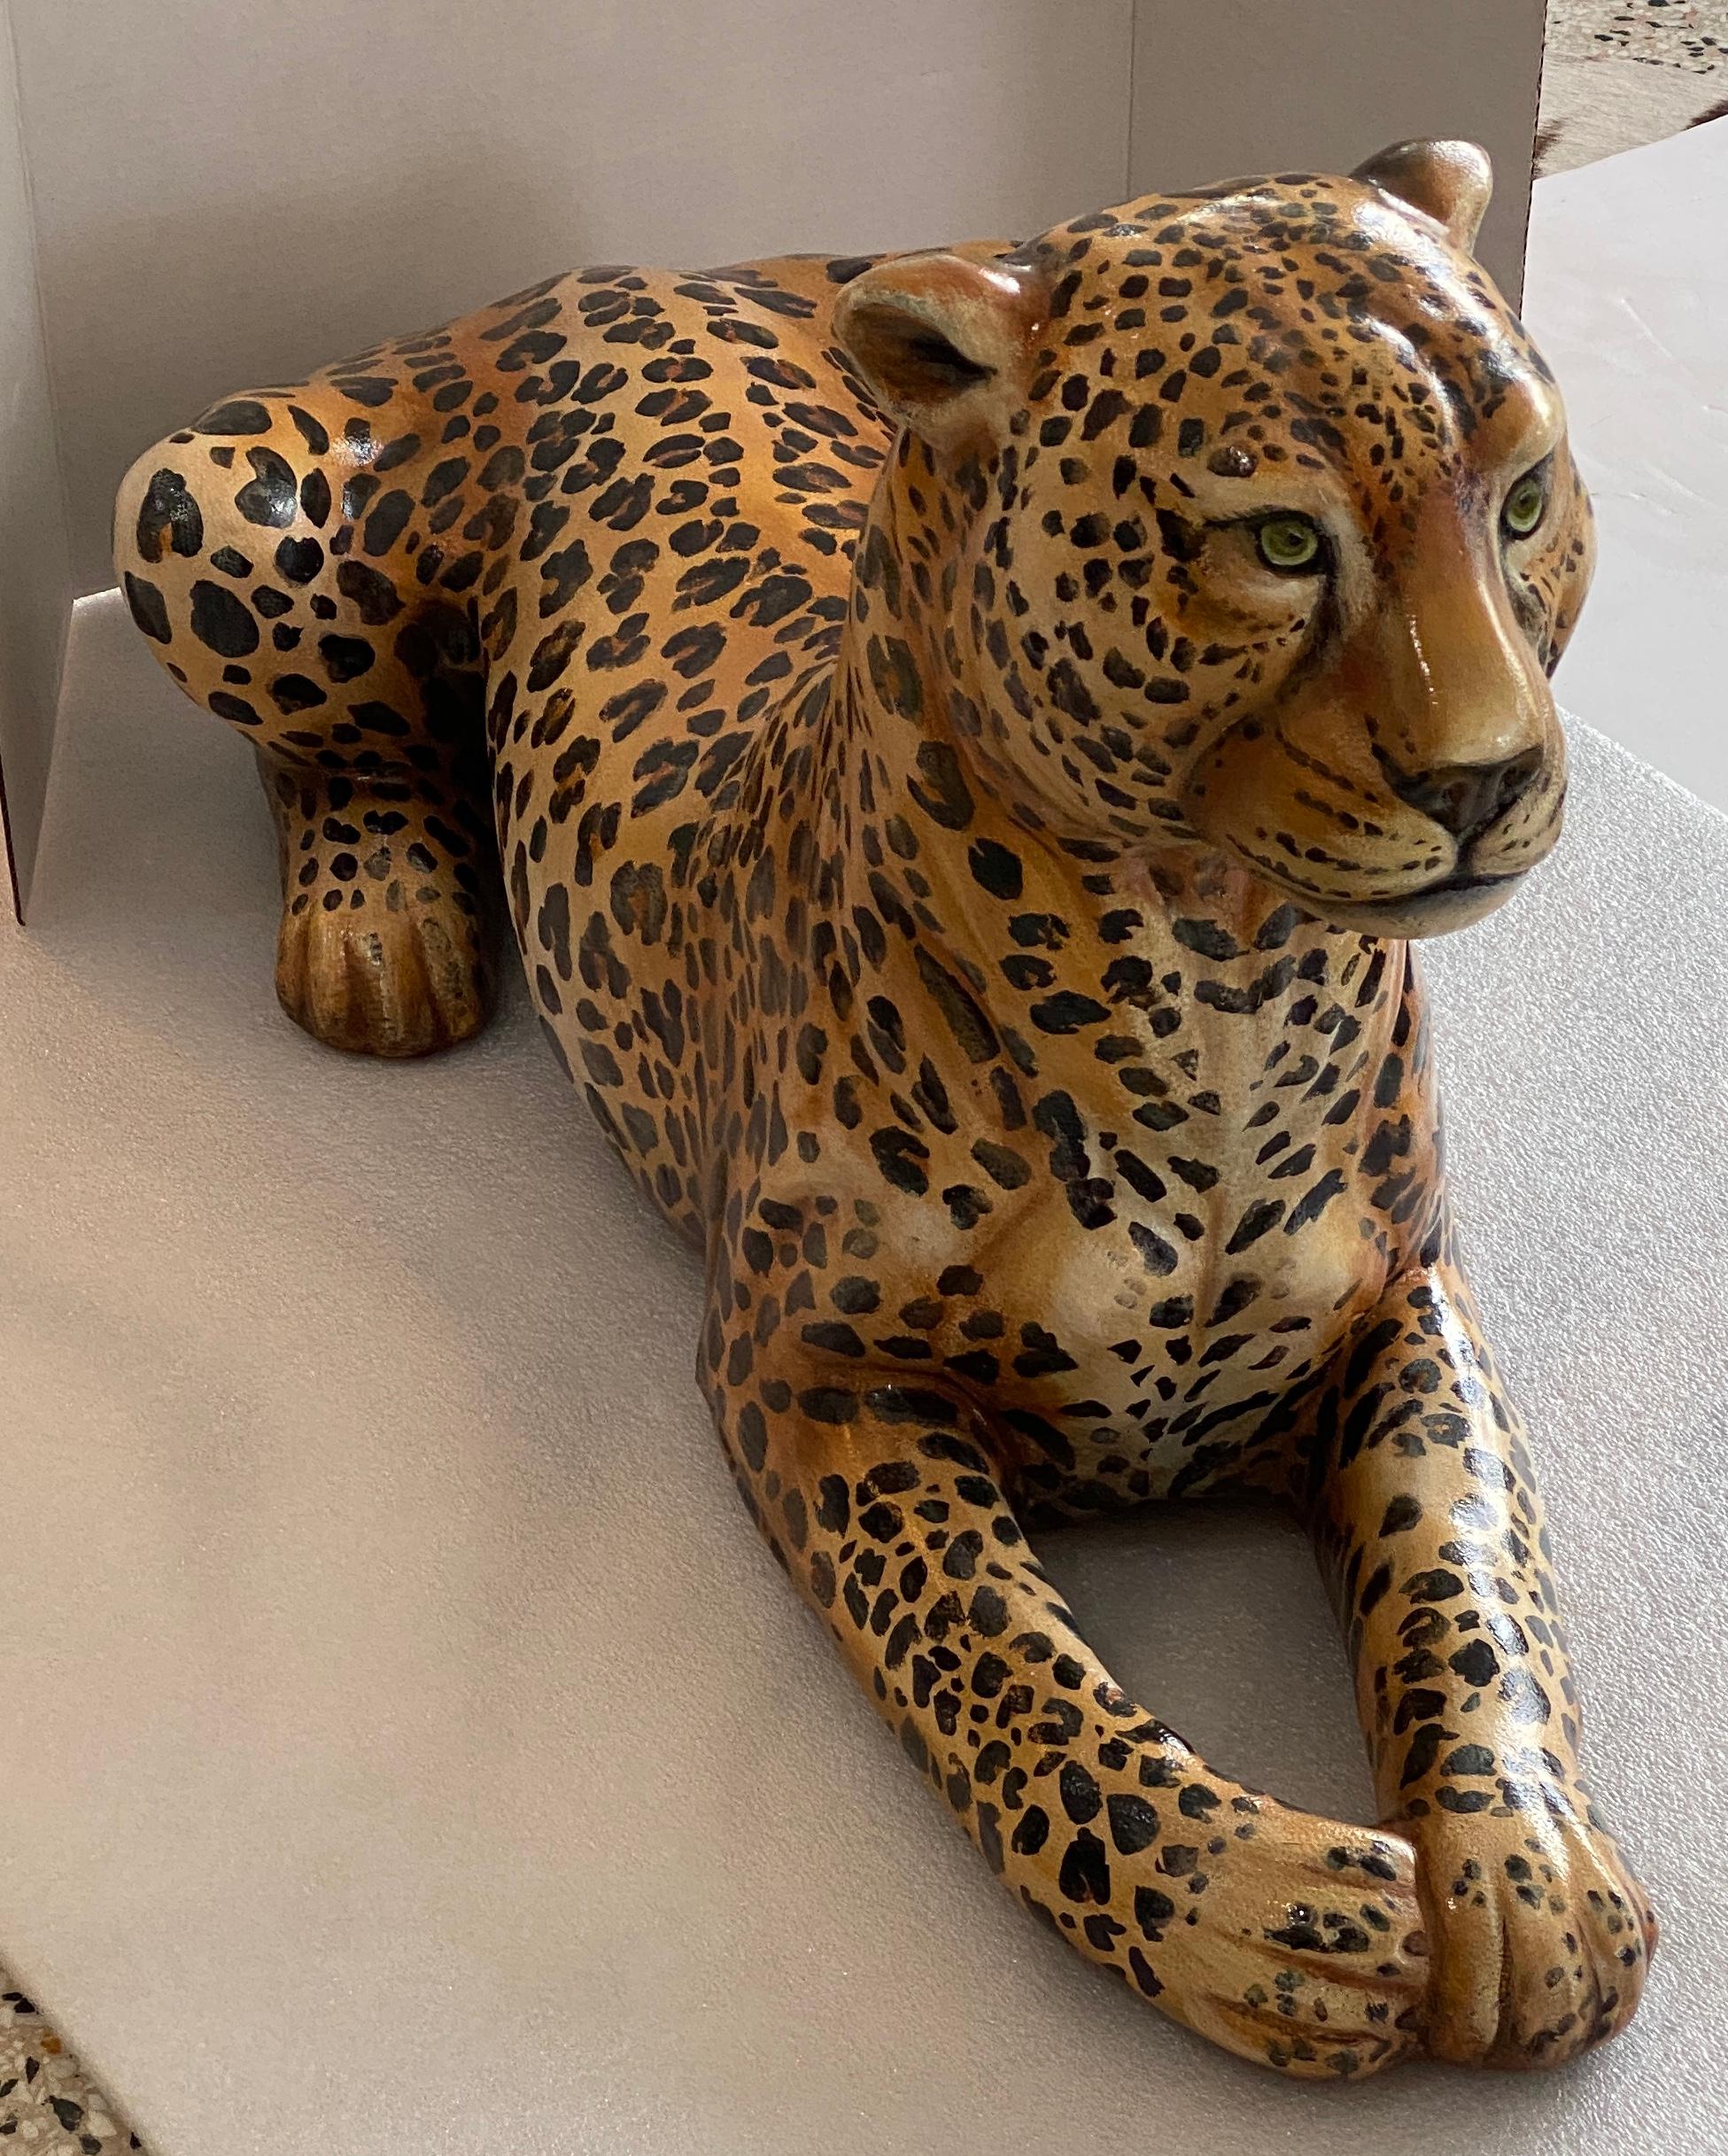 This stylish, chic and large scale figure of a leopard will make a dramatic statement with its form and hand-painted finish.